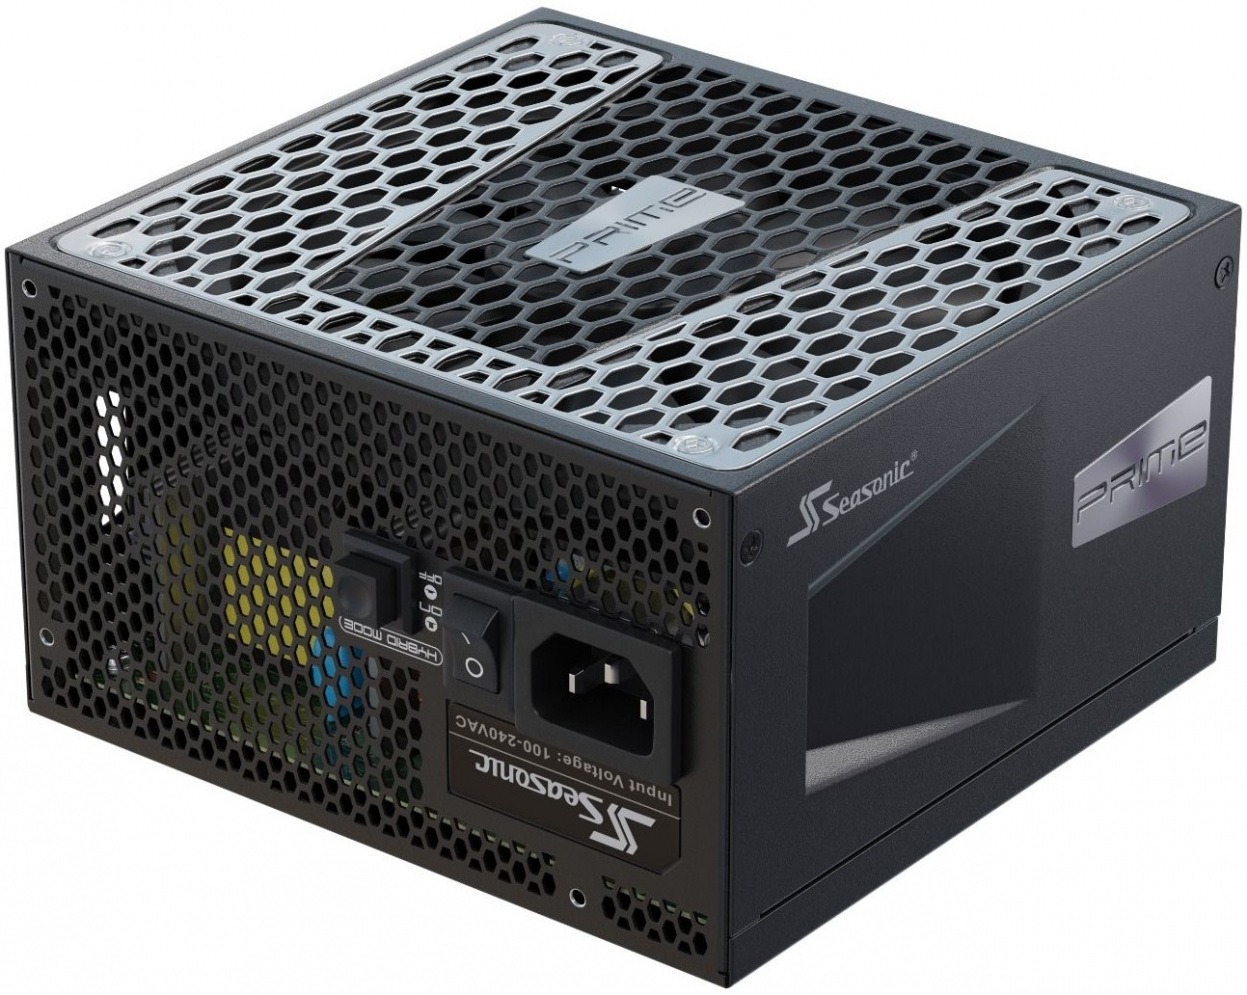 Seasonic PRIME GX-750, 750W 80+ Gold, Full Modular, Fan Control in Fanless,  Silent, and Cooling Mode, 12 Year Warranty, Perfect Power Supply for